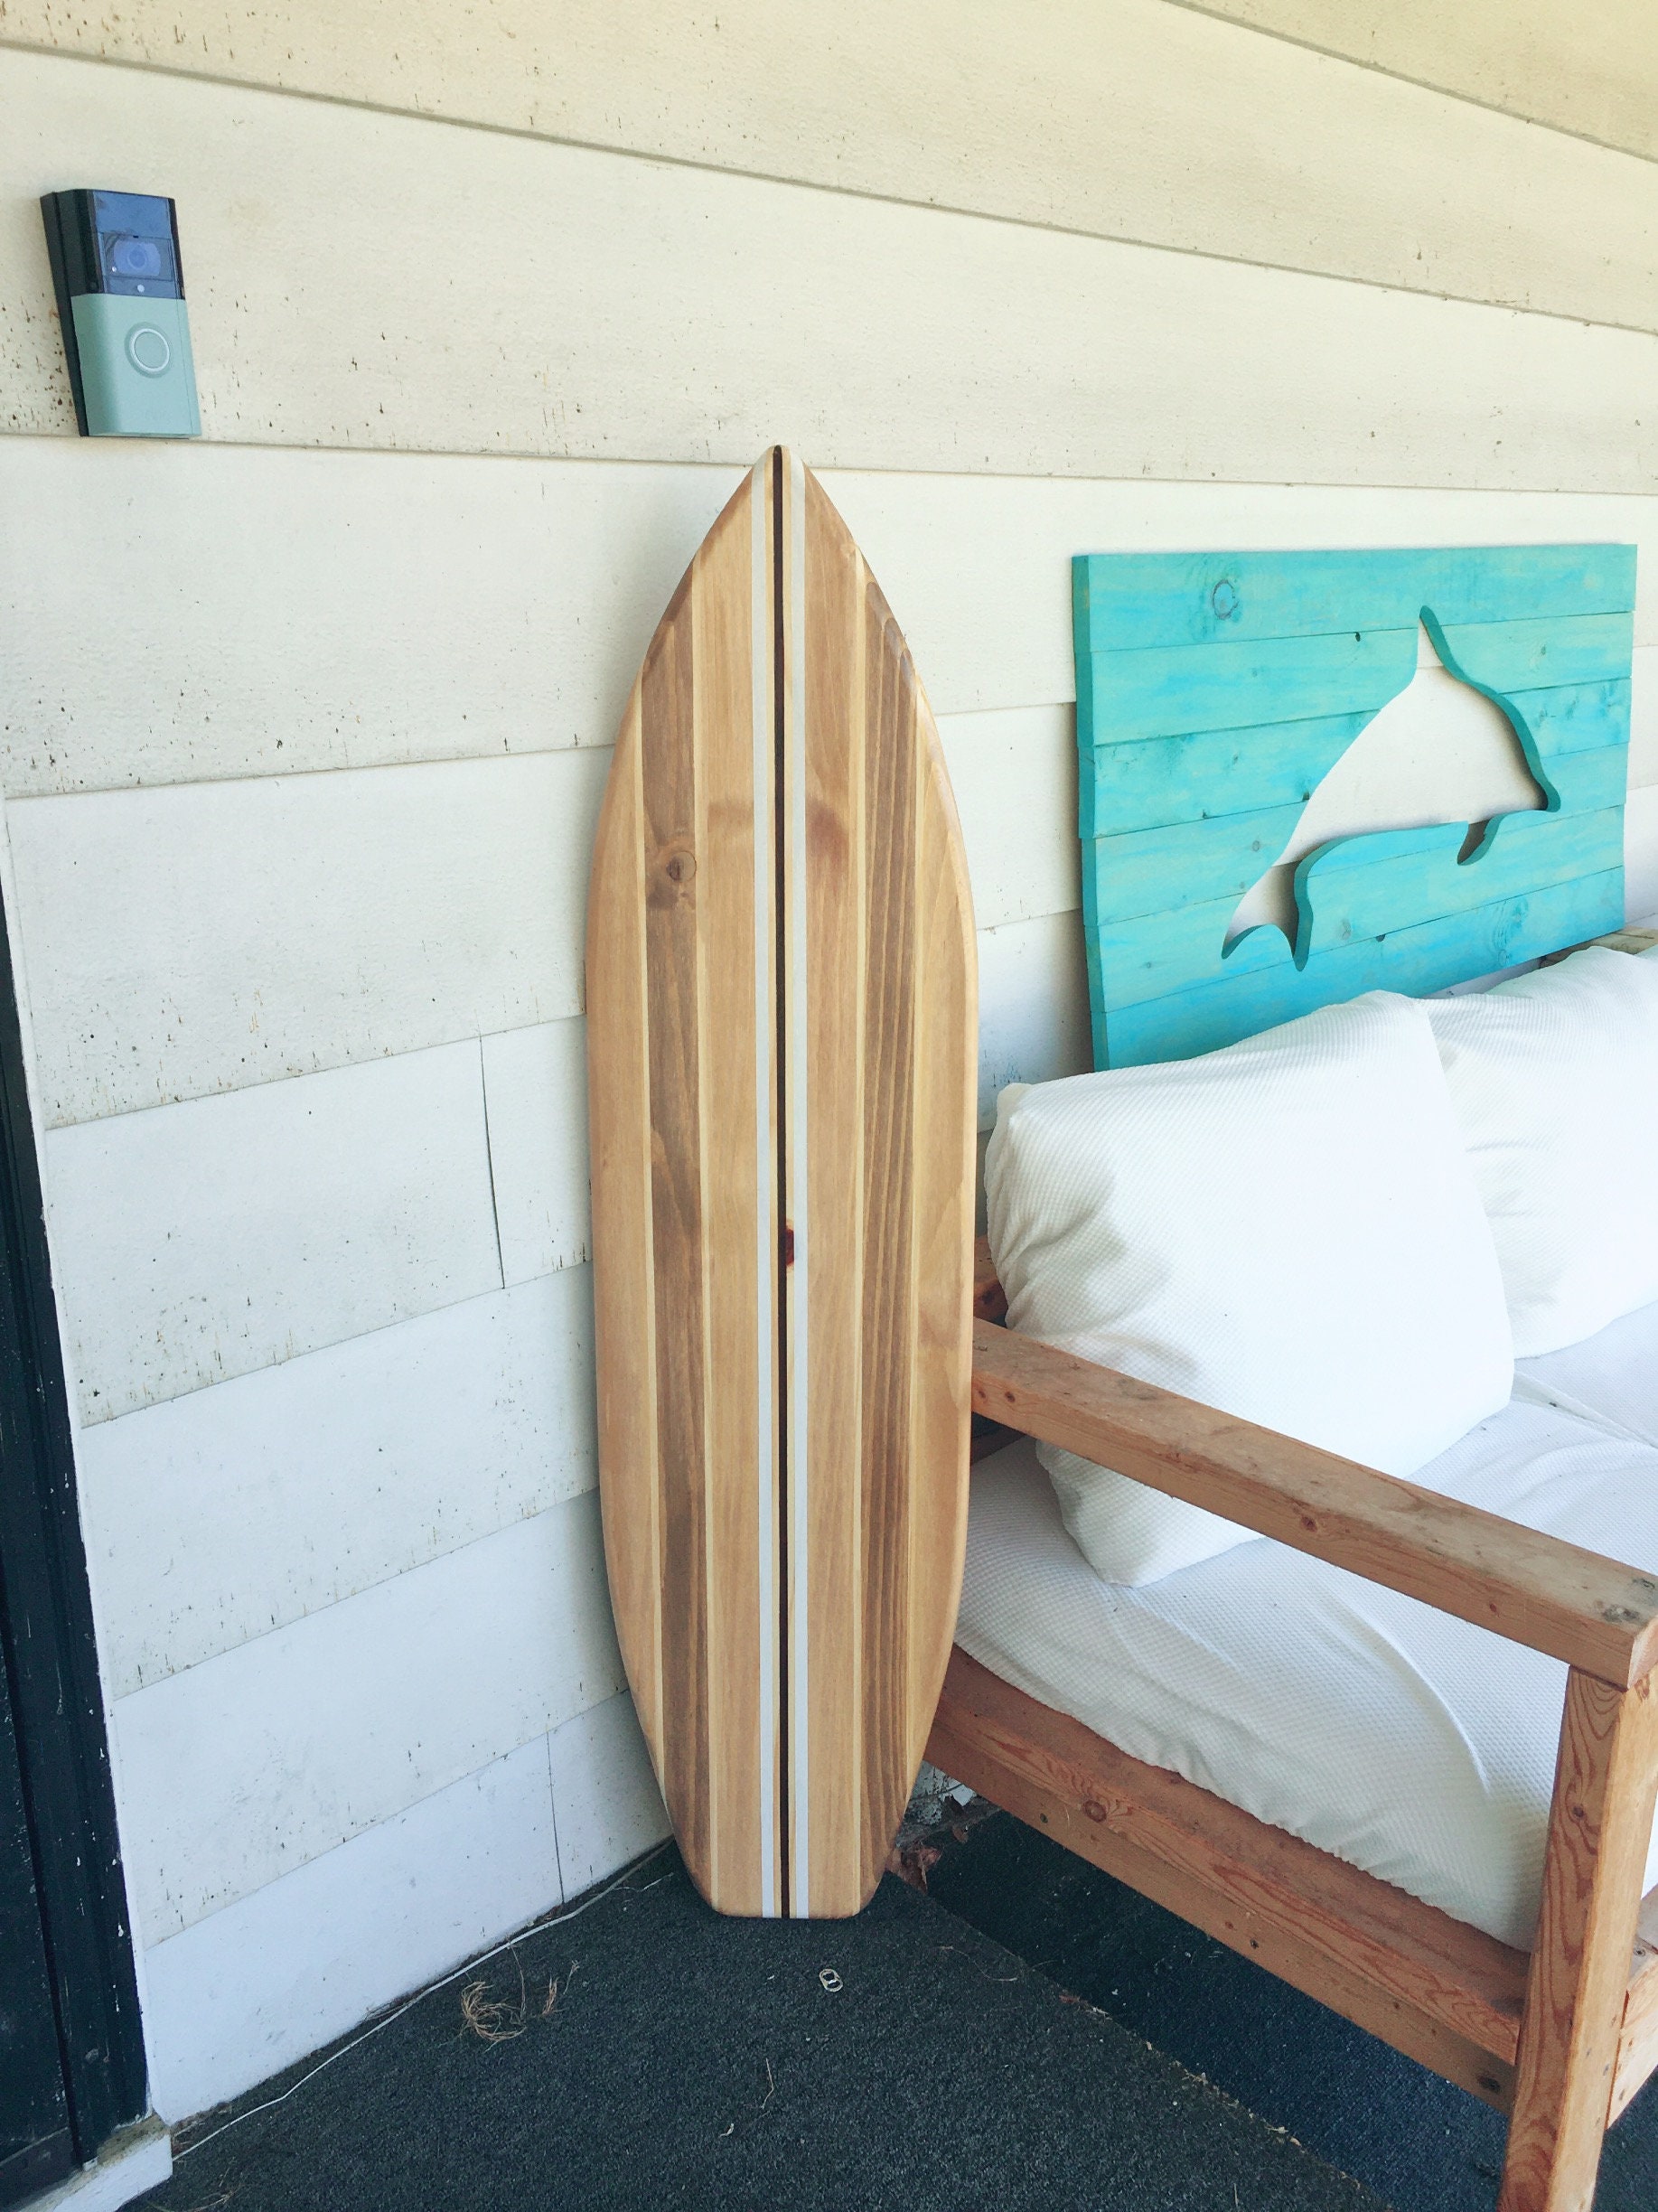 4 Foot Wood Surfboard Wall Art With Natural Stained and White picture photo pic